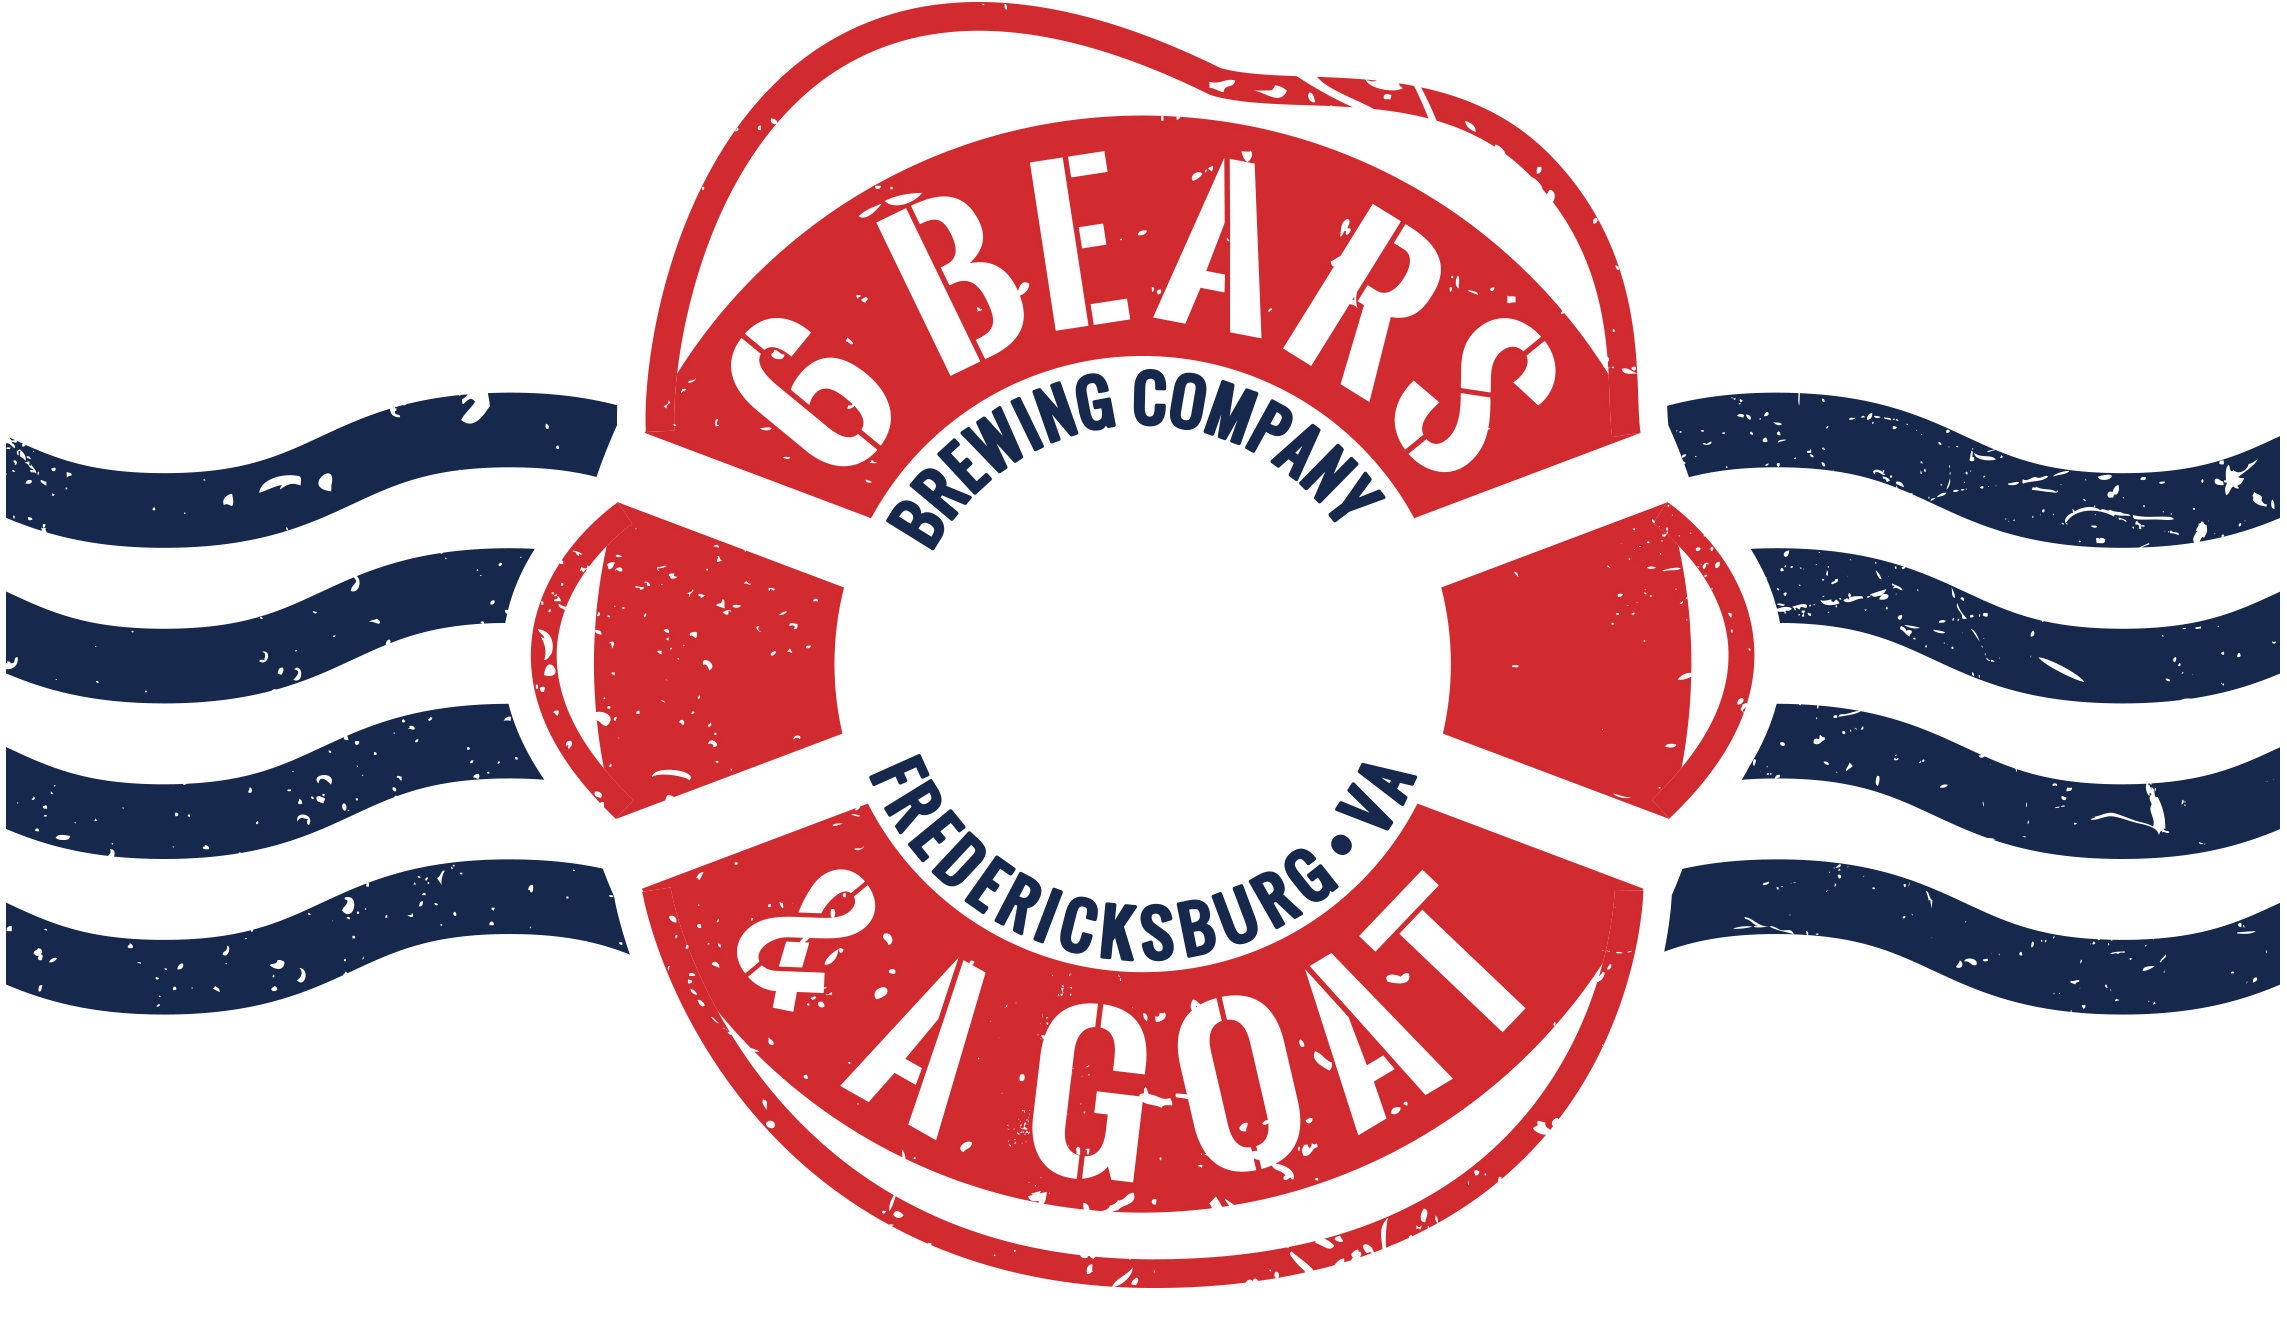 6 Bears & a Goat Wins in U.S. Open Beer Championship